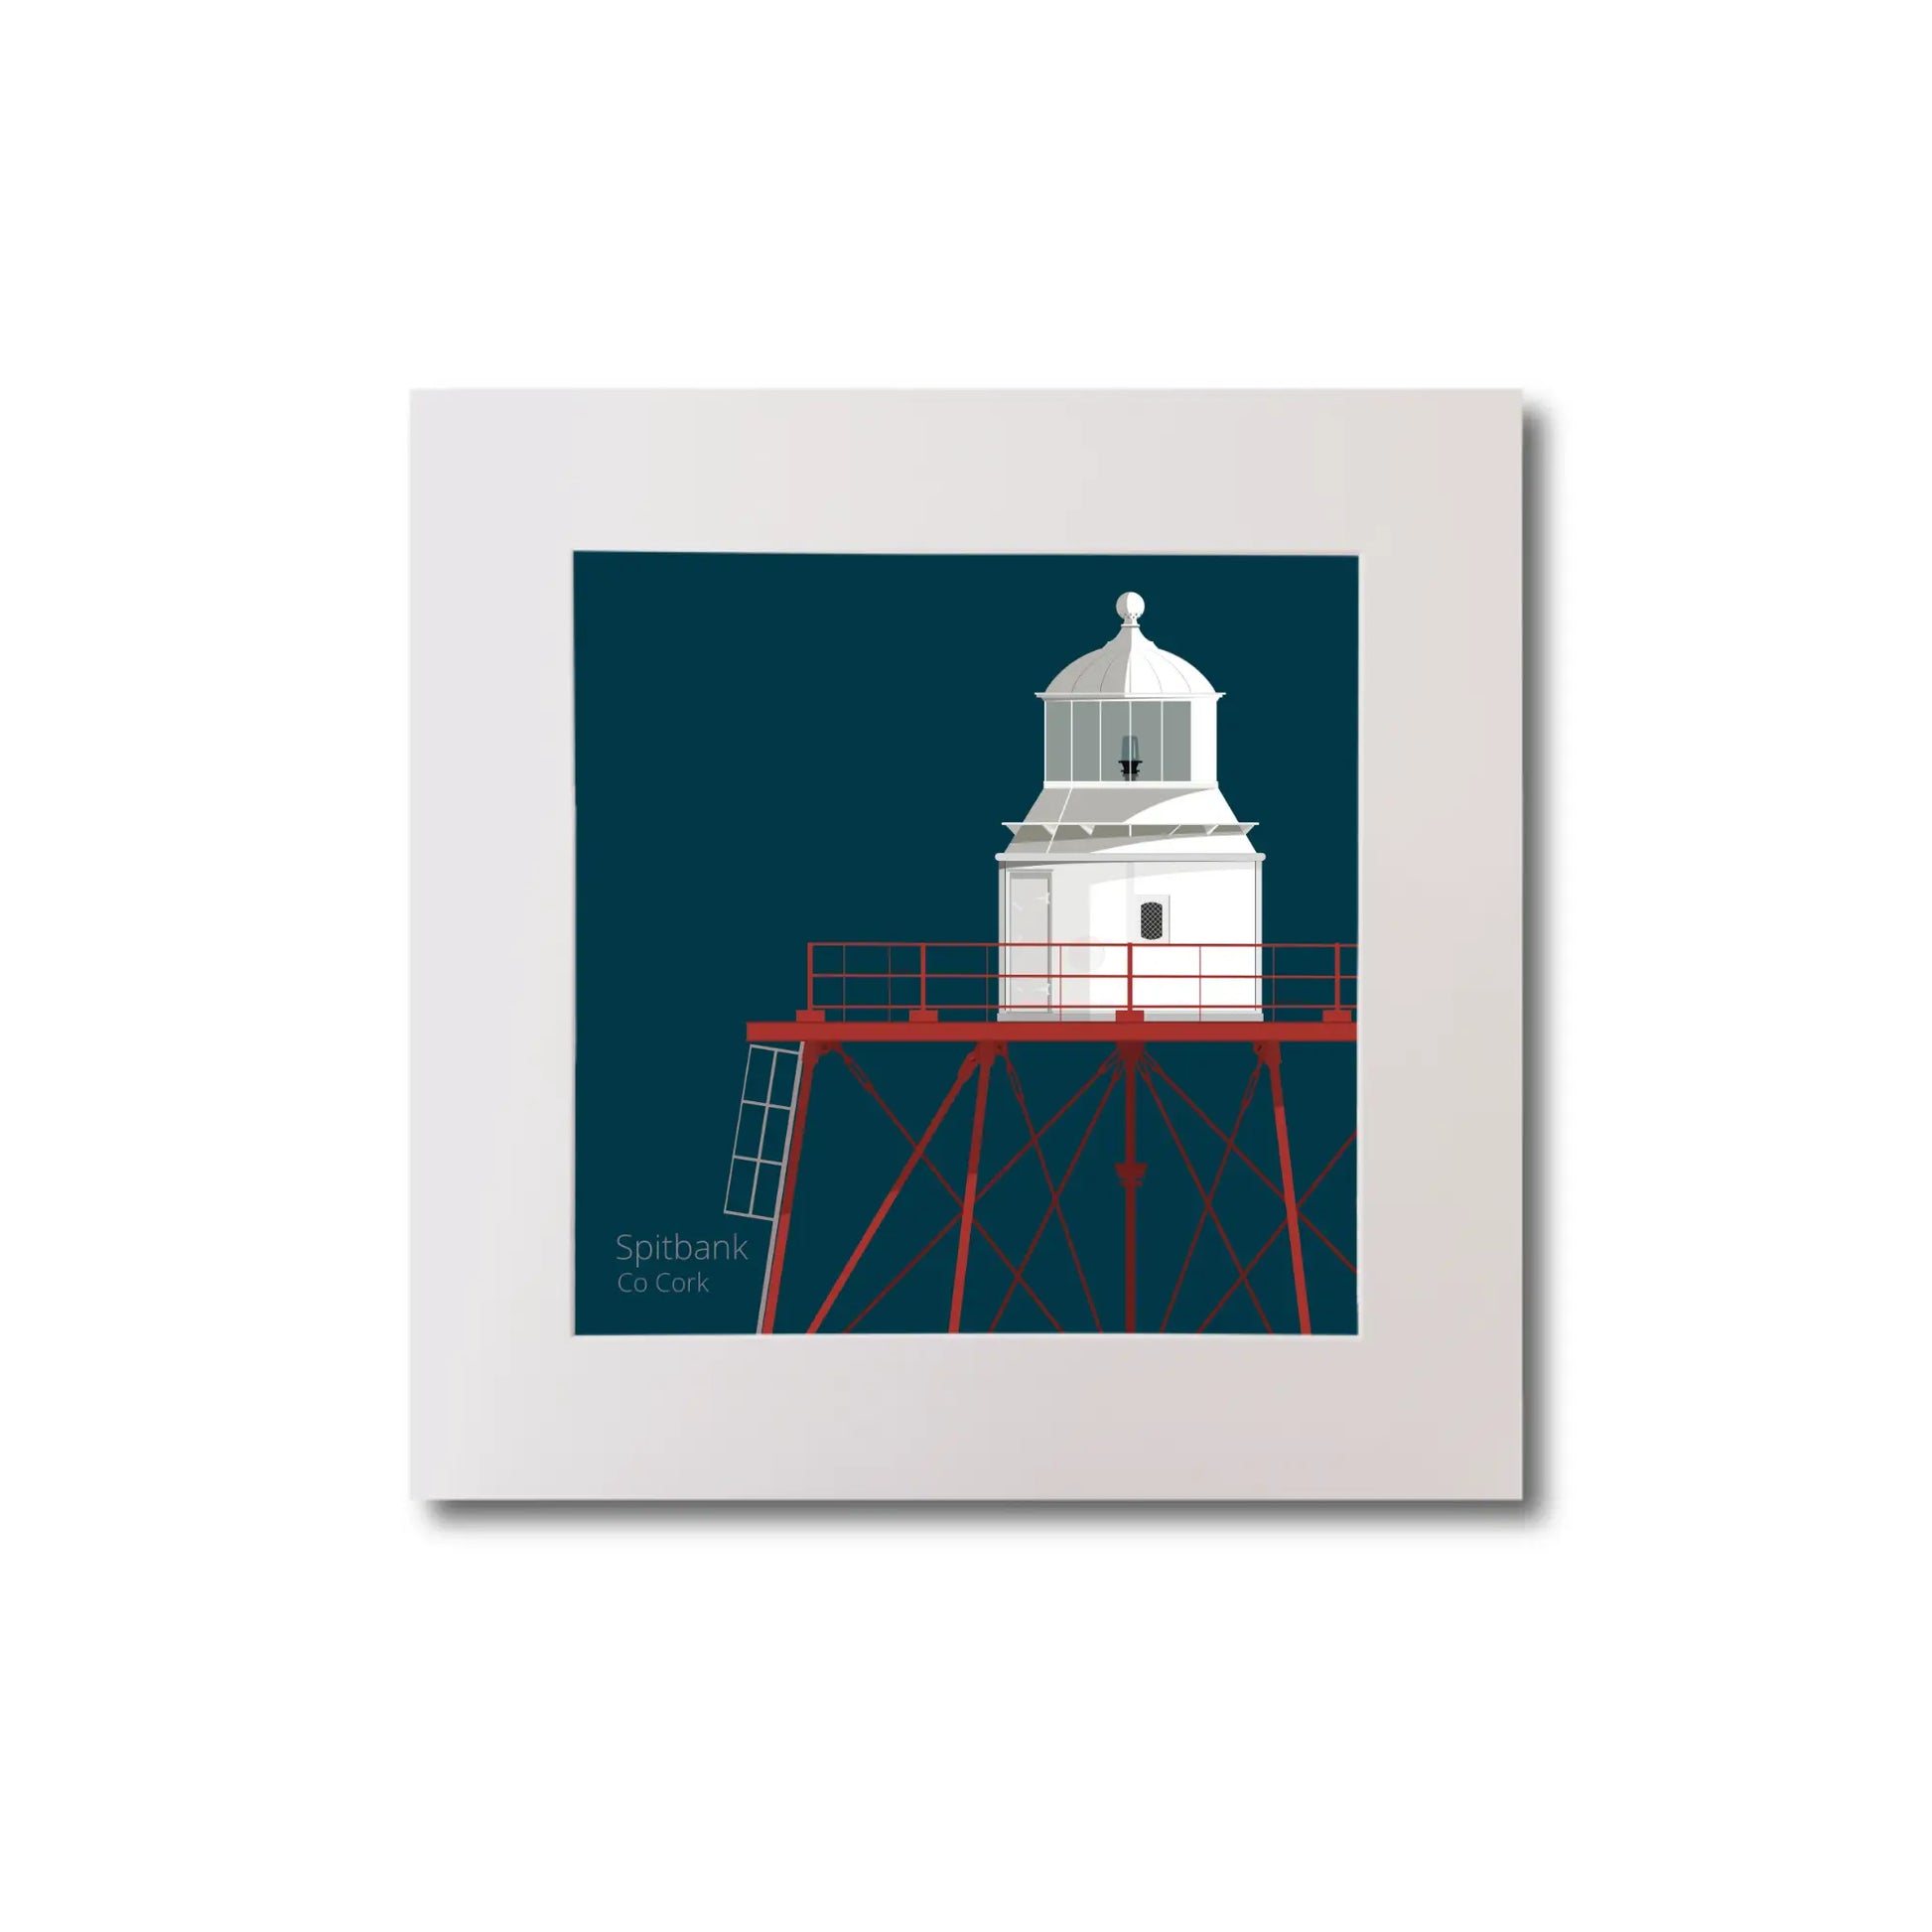 Illustration of Spitbank lighthouse on a midnight blue background, mounted and measuring 20x20cm.